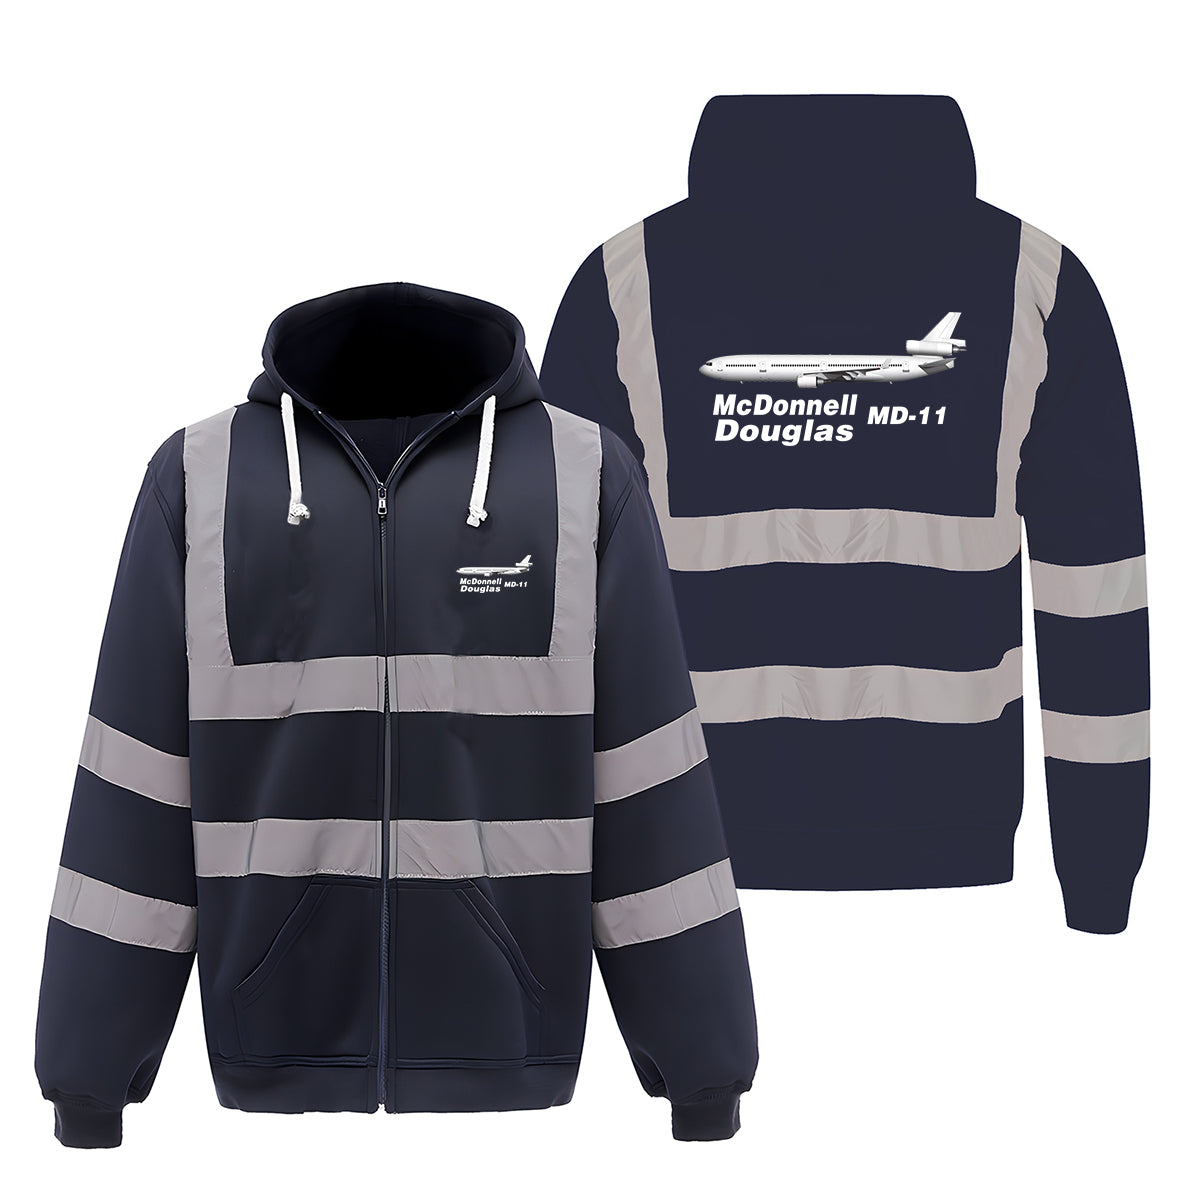 The McDonnell Douglas MD-11 Designed Reflective Zipped Hoodies